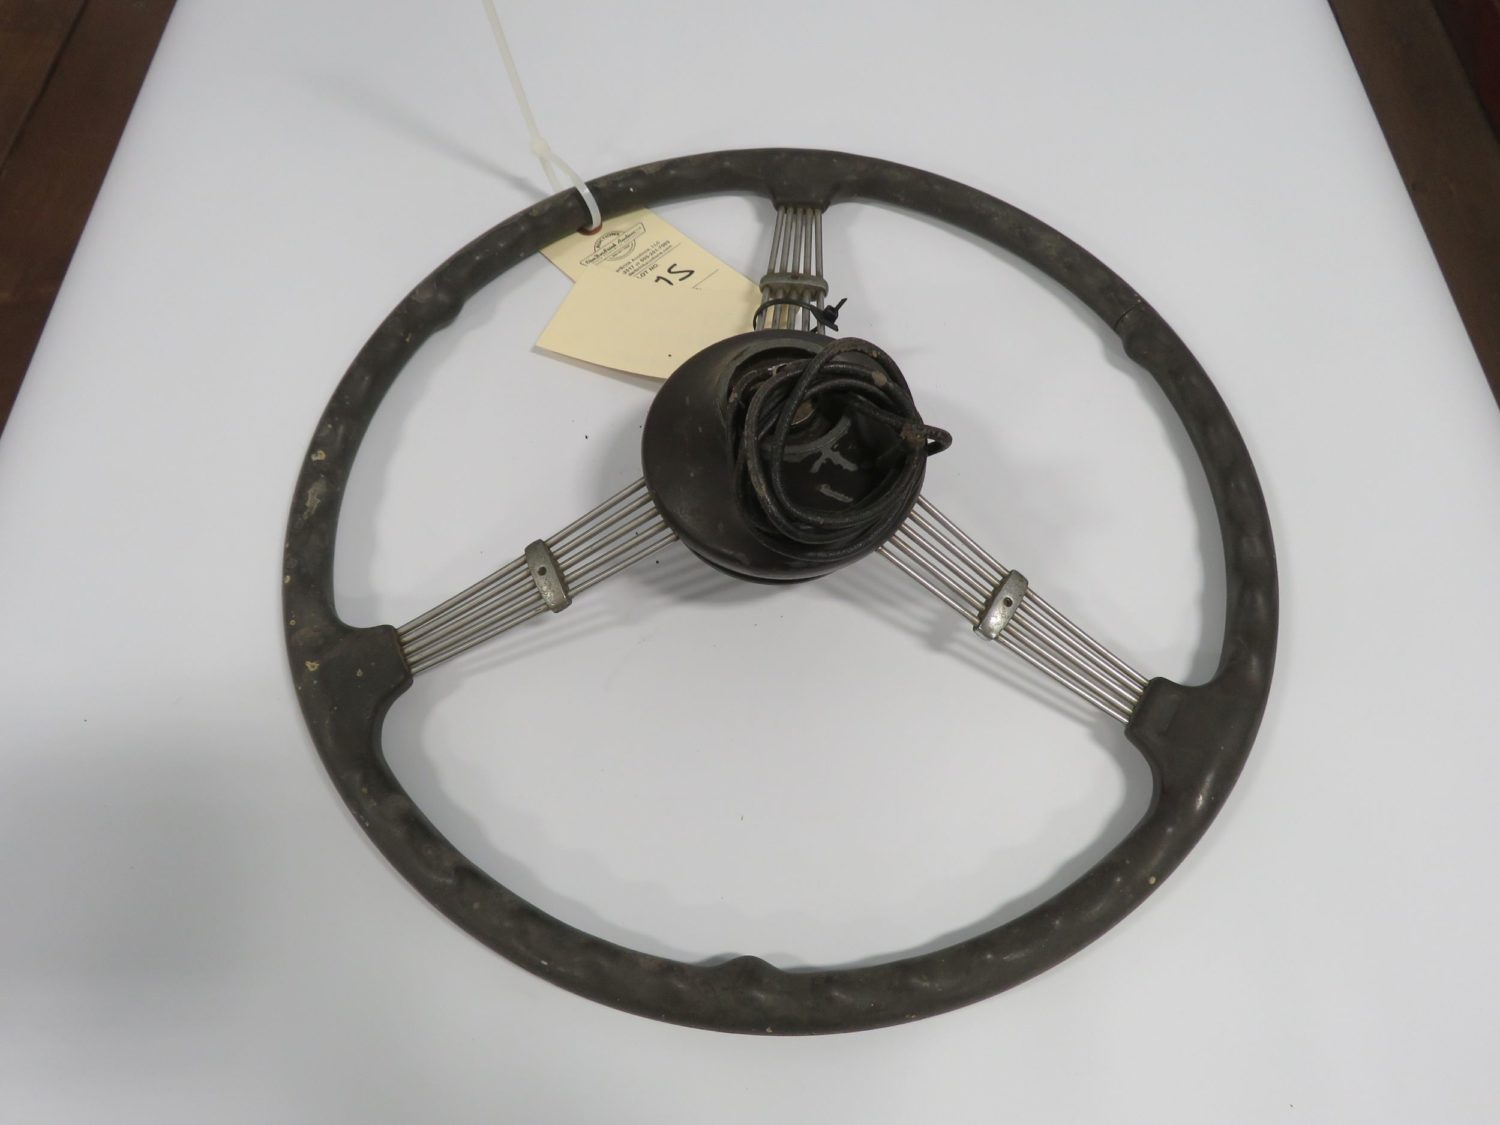 1937 Ford Banjo Steering Wheel w/Horn Button - Image 2